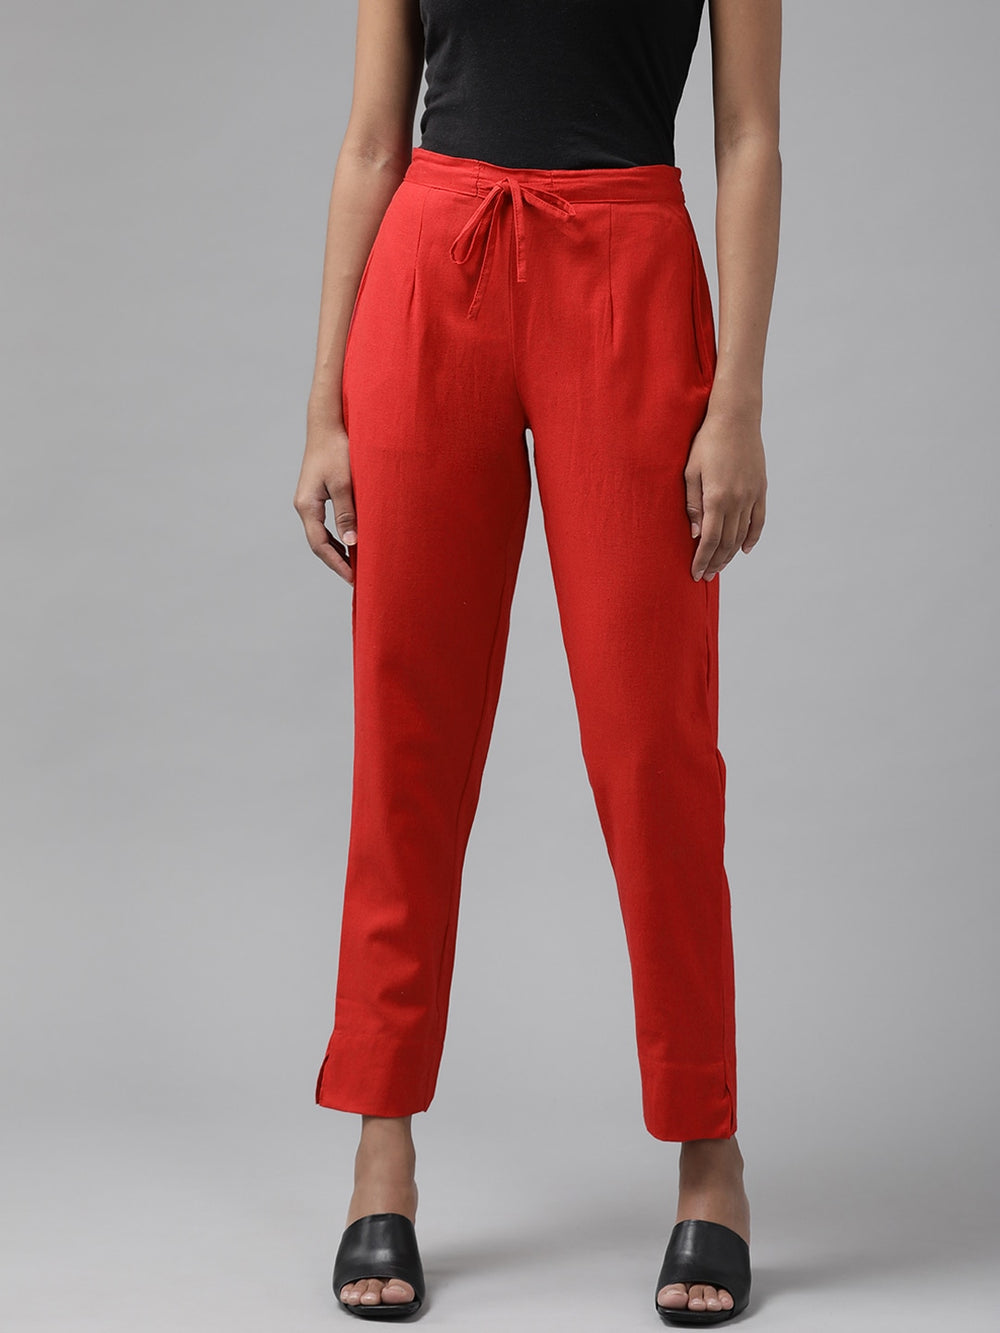 Red Cotton Fit Trousers Yufta Store